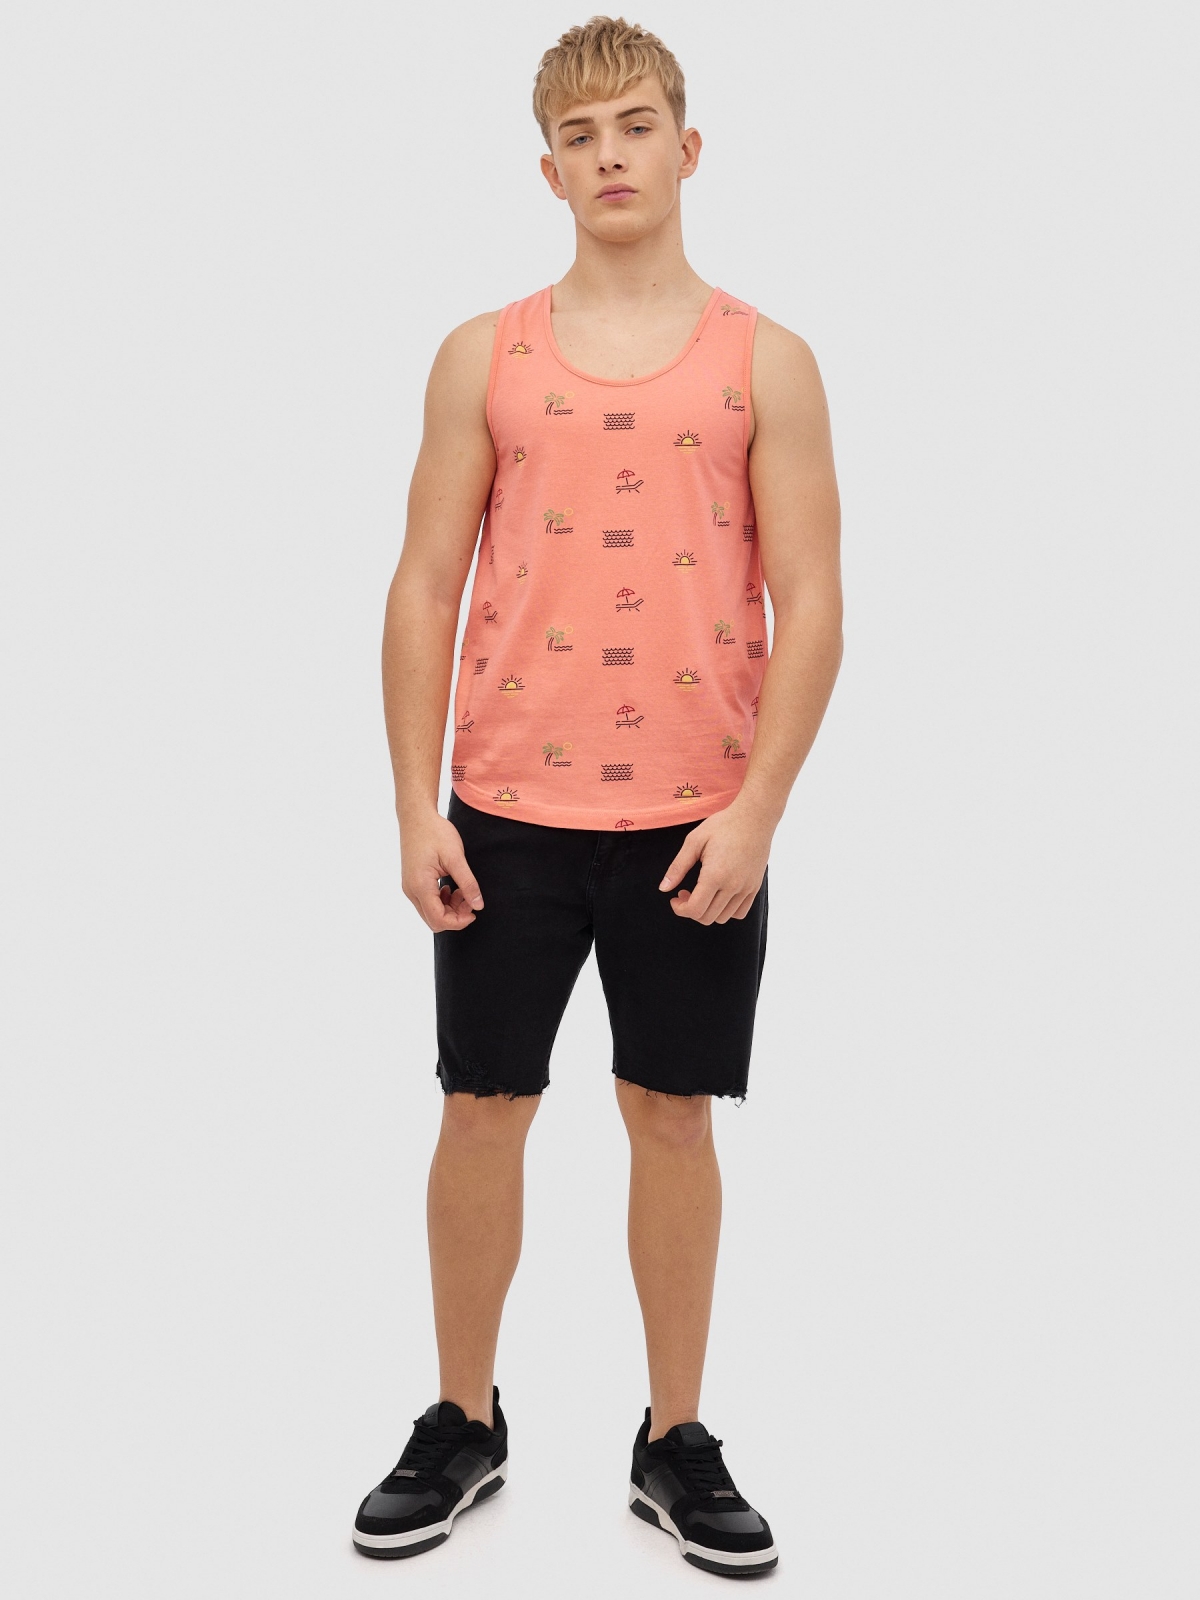 Tropical tank top pink front view